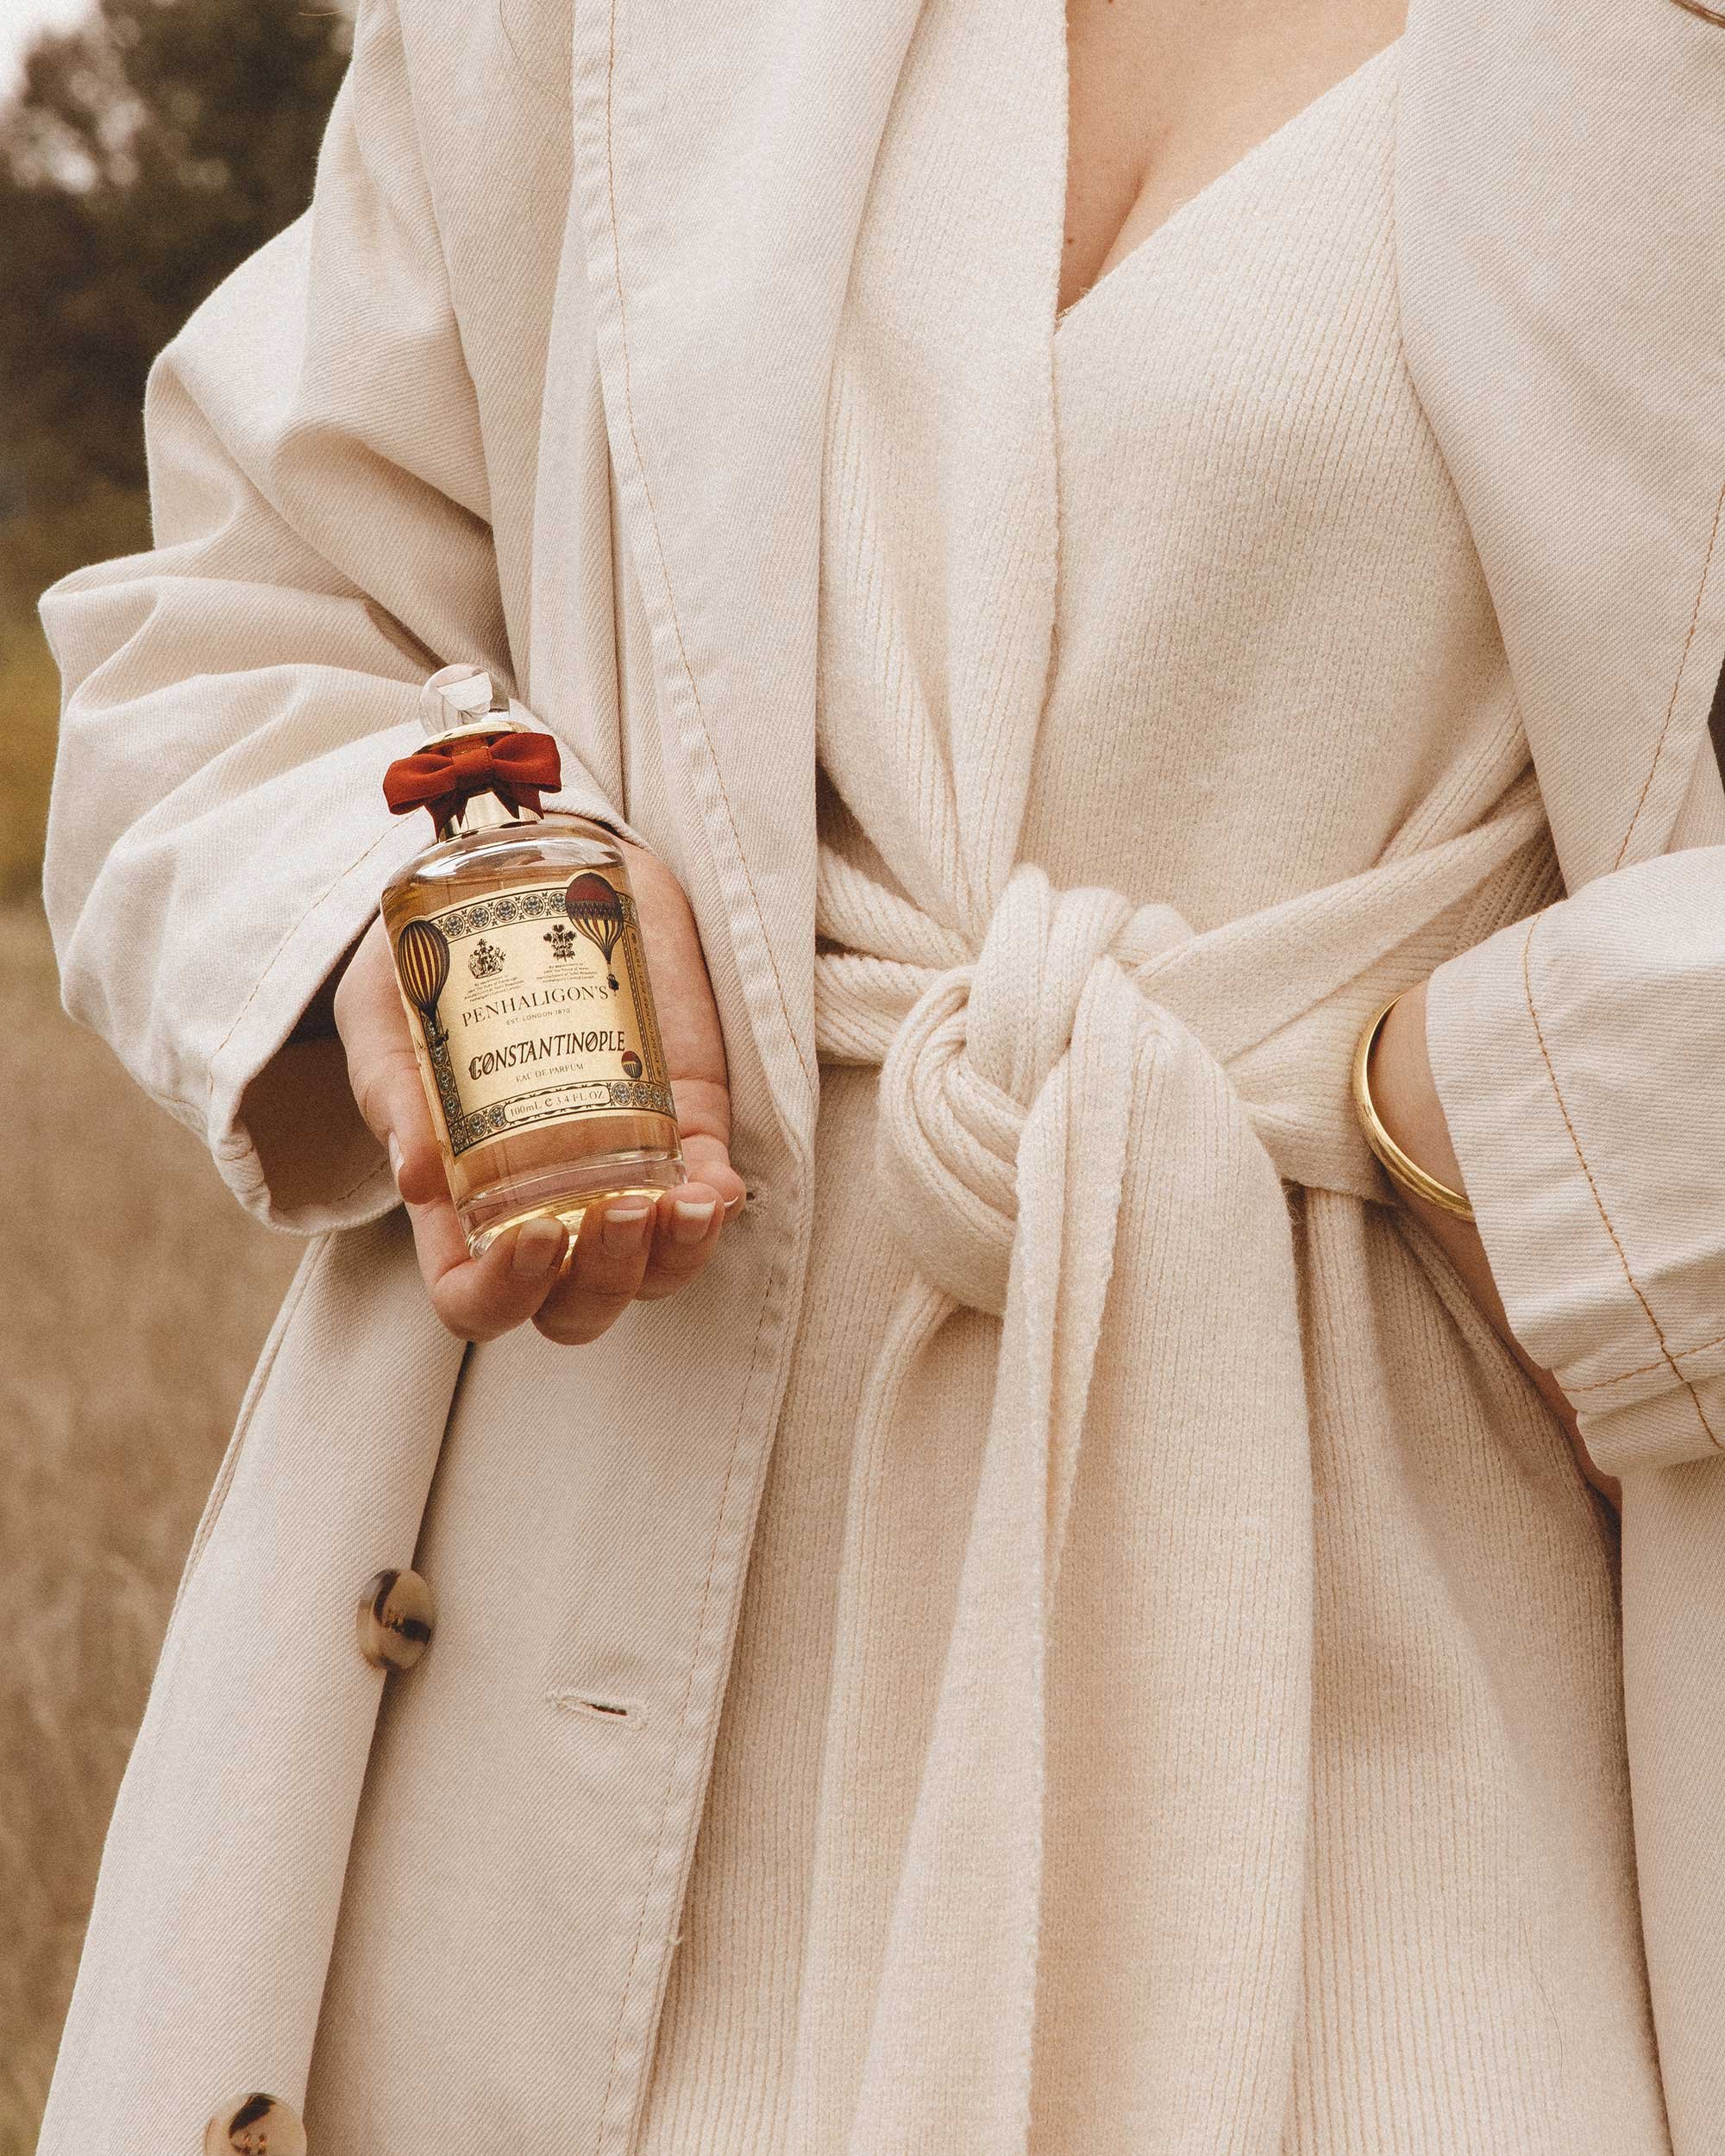 Neutral Fall Outfit Idea. Sarah Butler of @sarahchristine wearing Penhaligon Constantinople Eau De Parfum A fragrance created for the Queen of Cities, where elegant florals collide with warm, earthy aromas in Seattle, Washington. 1.jpg